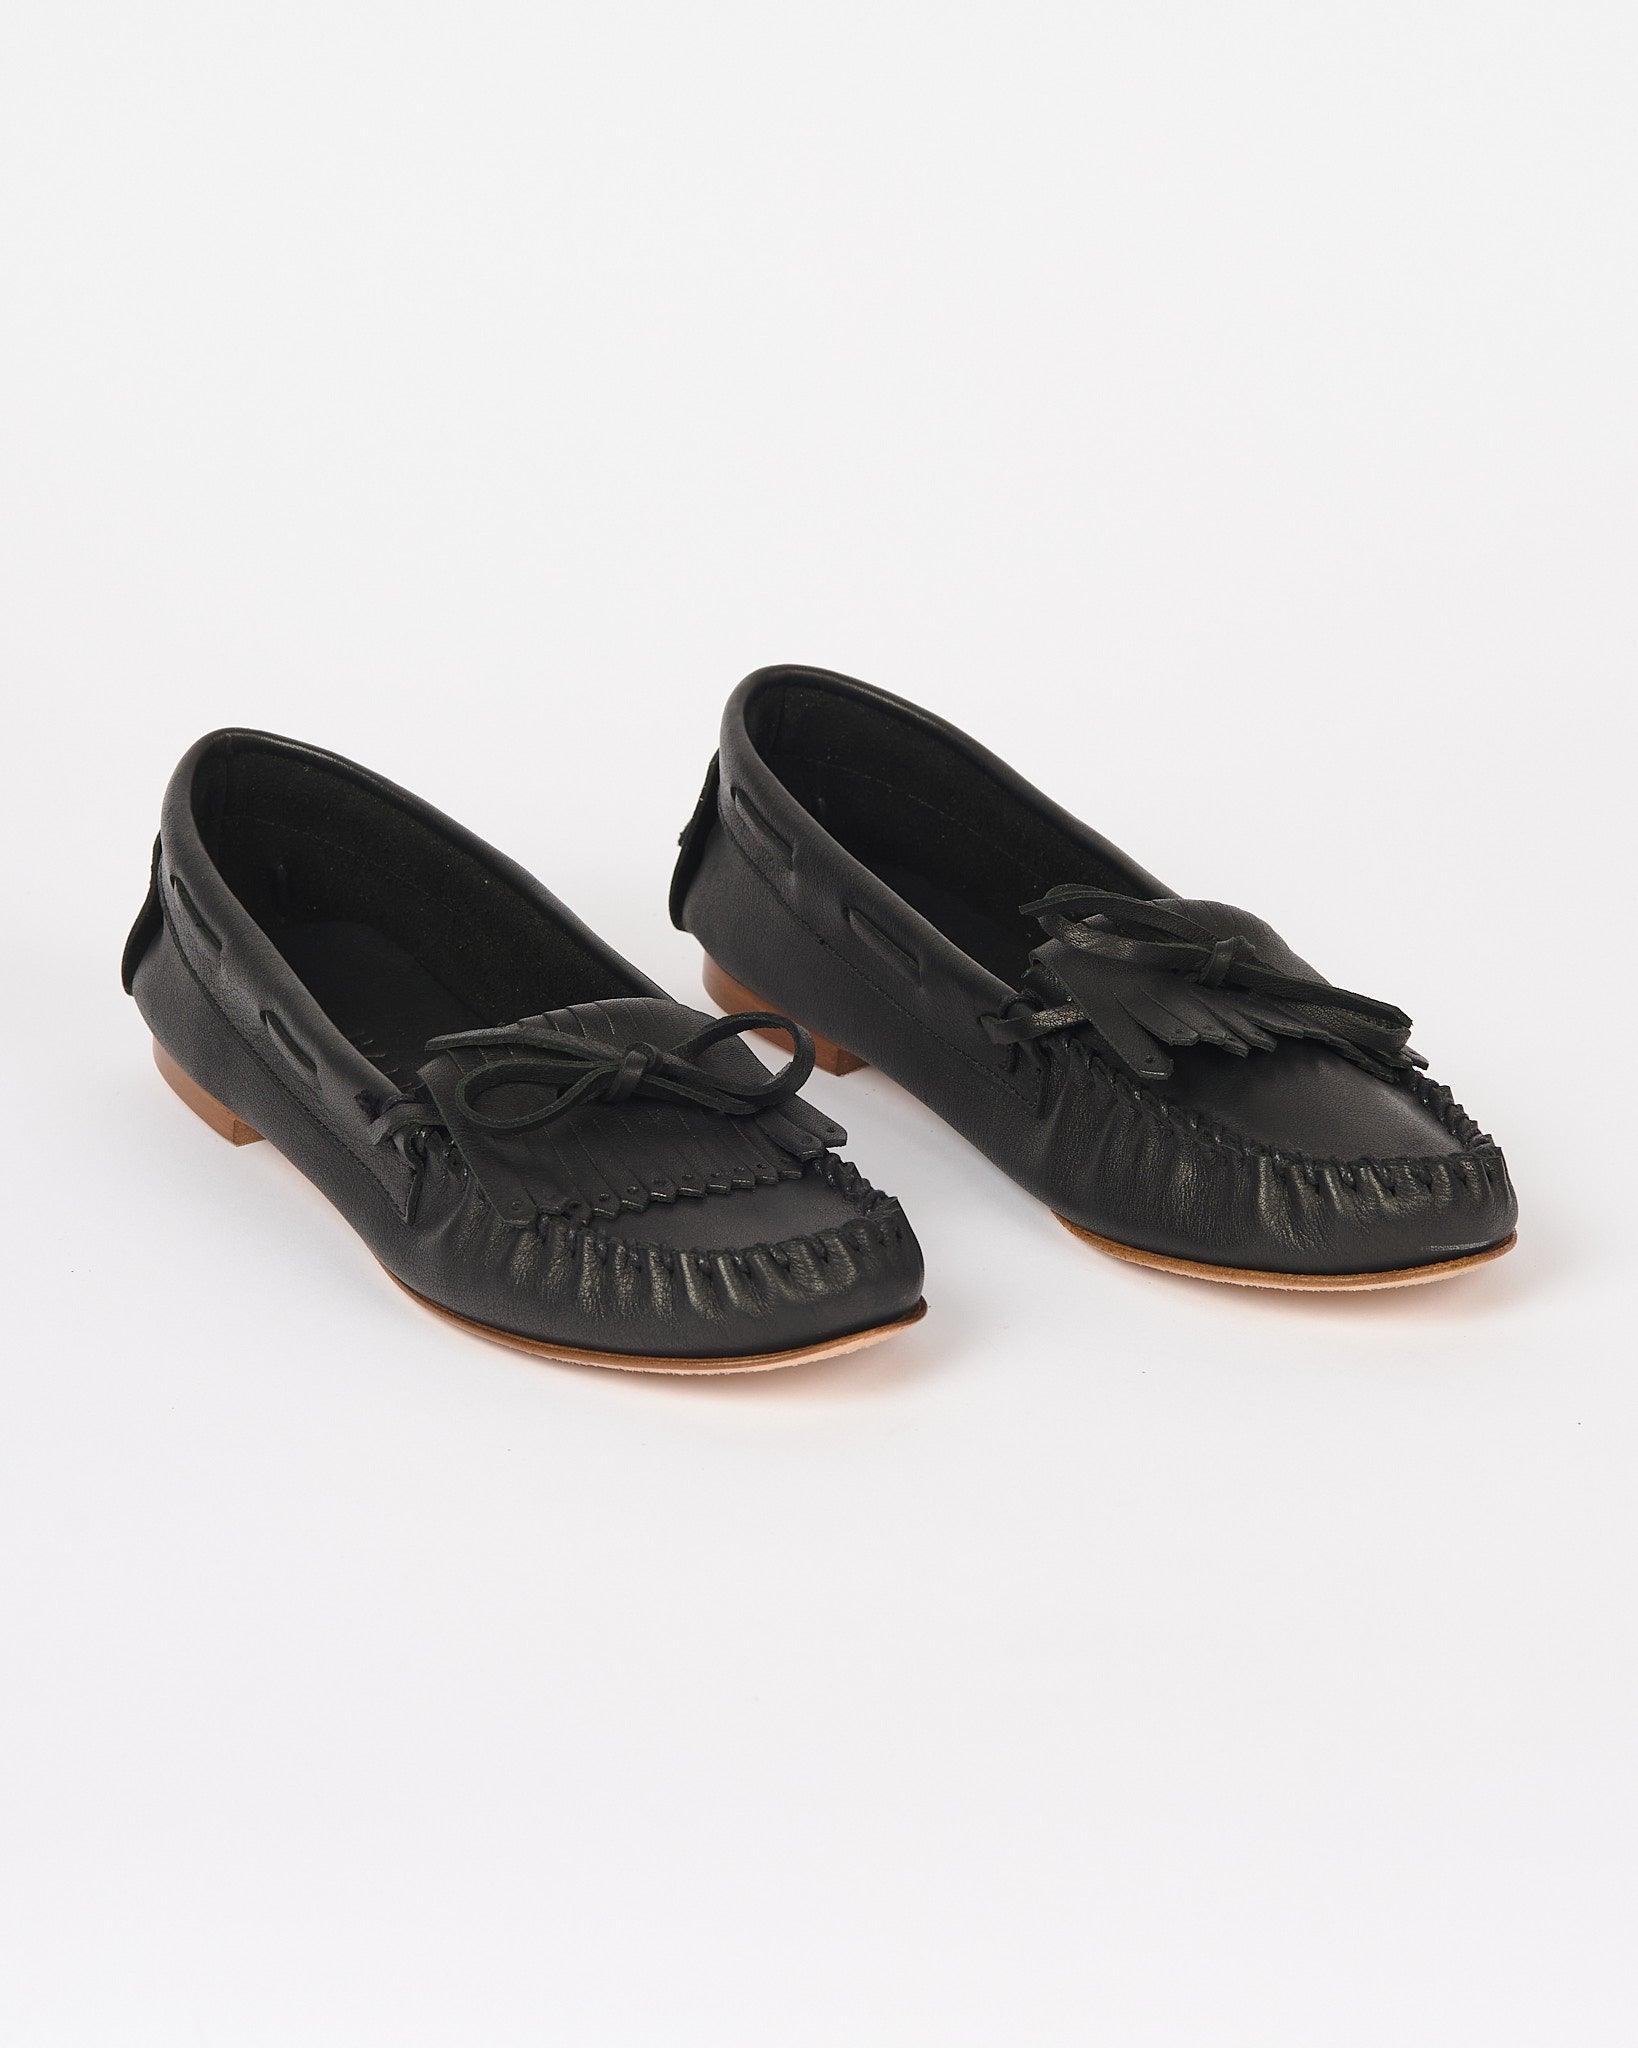 Camp Loafer in Black Angled Front View